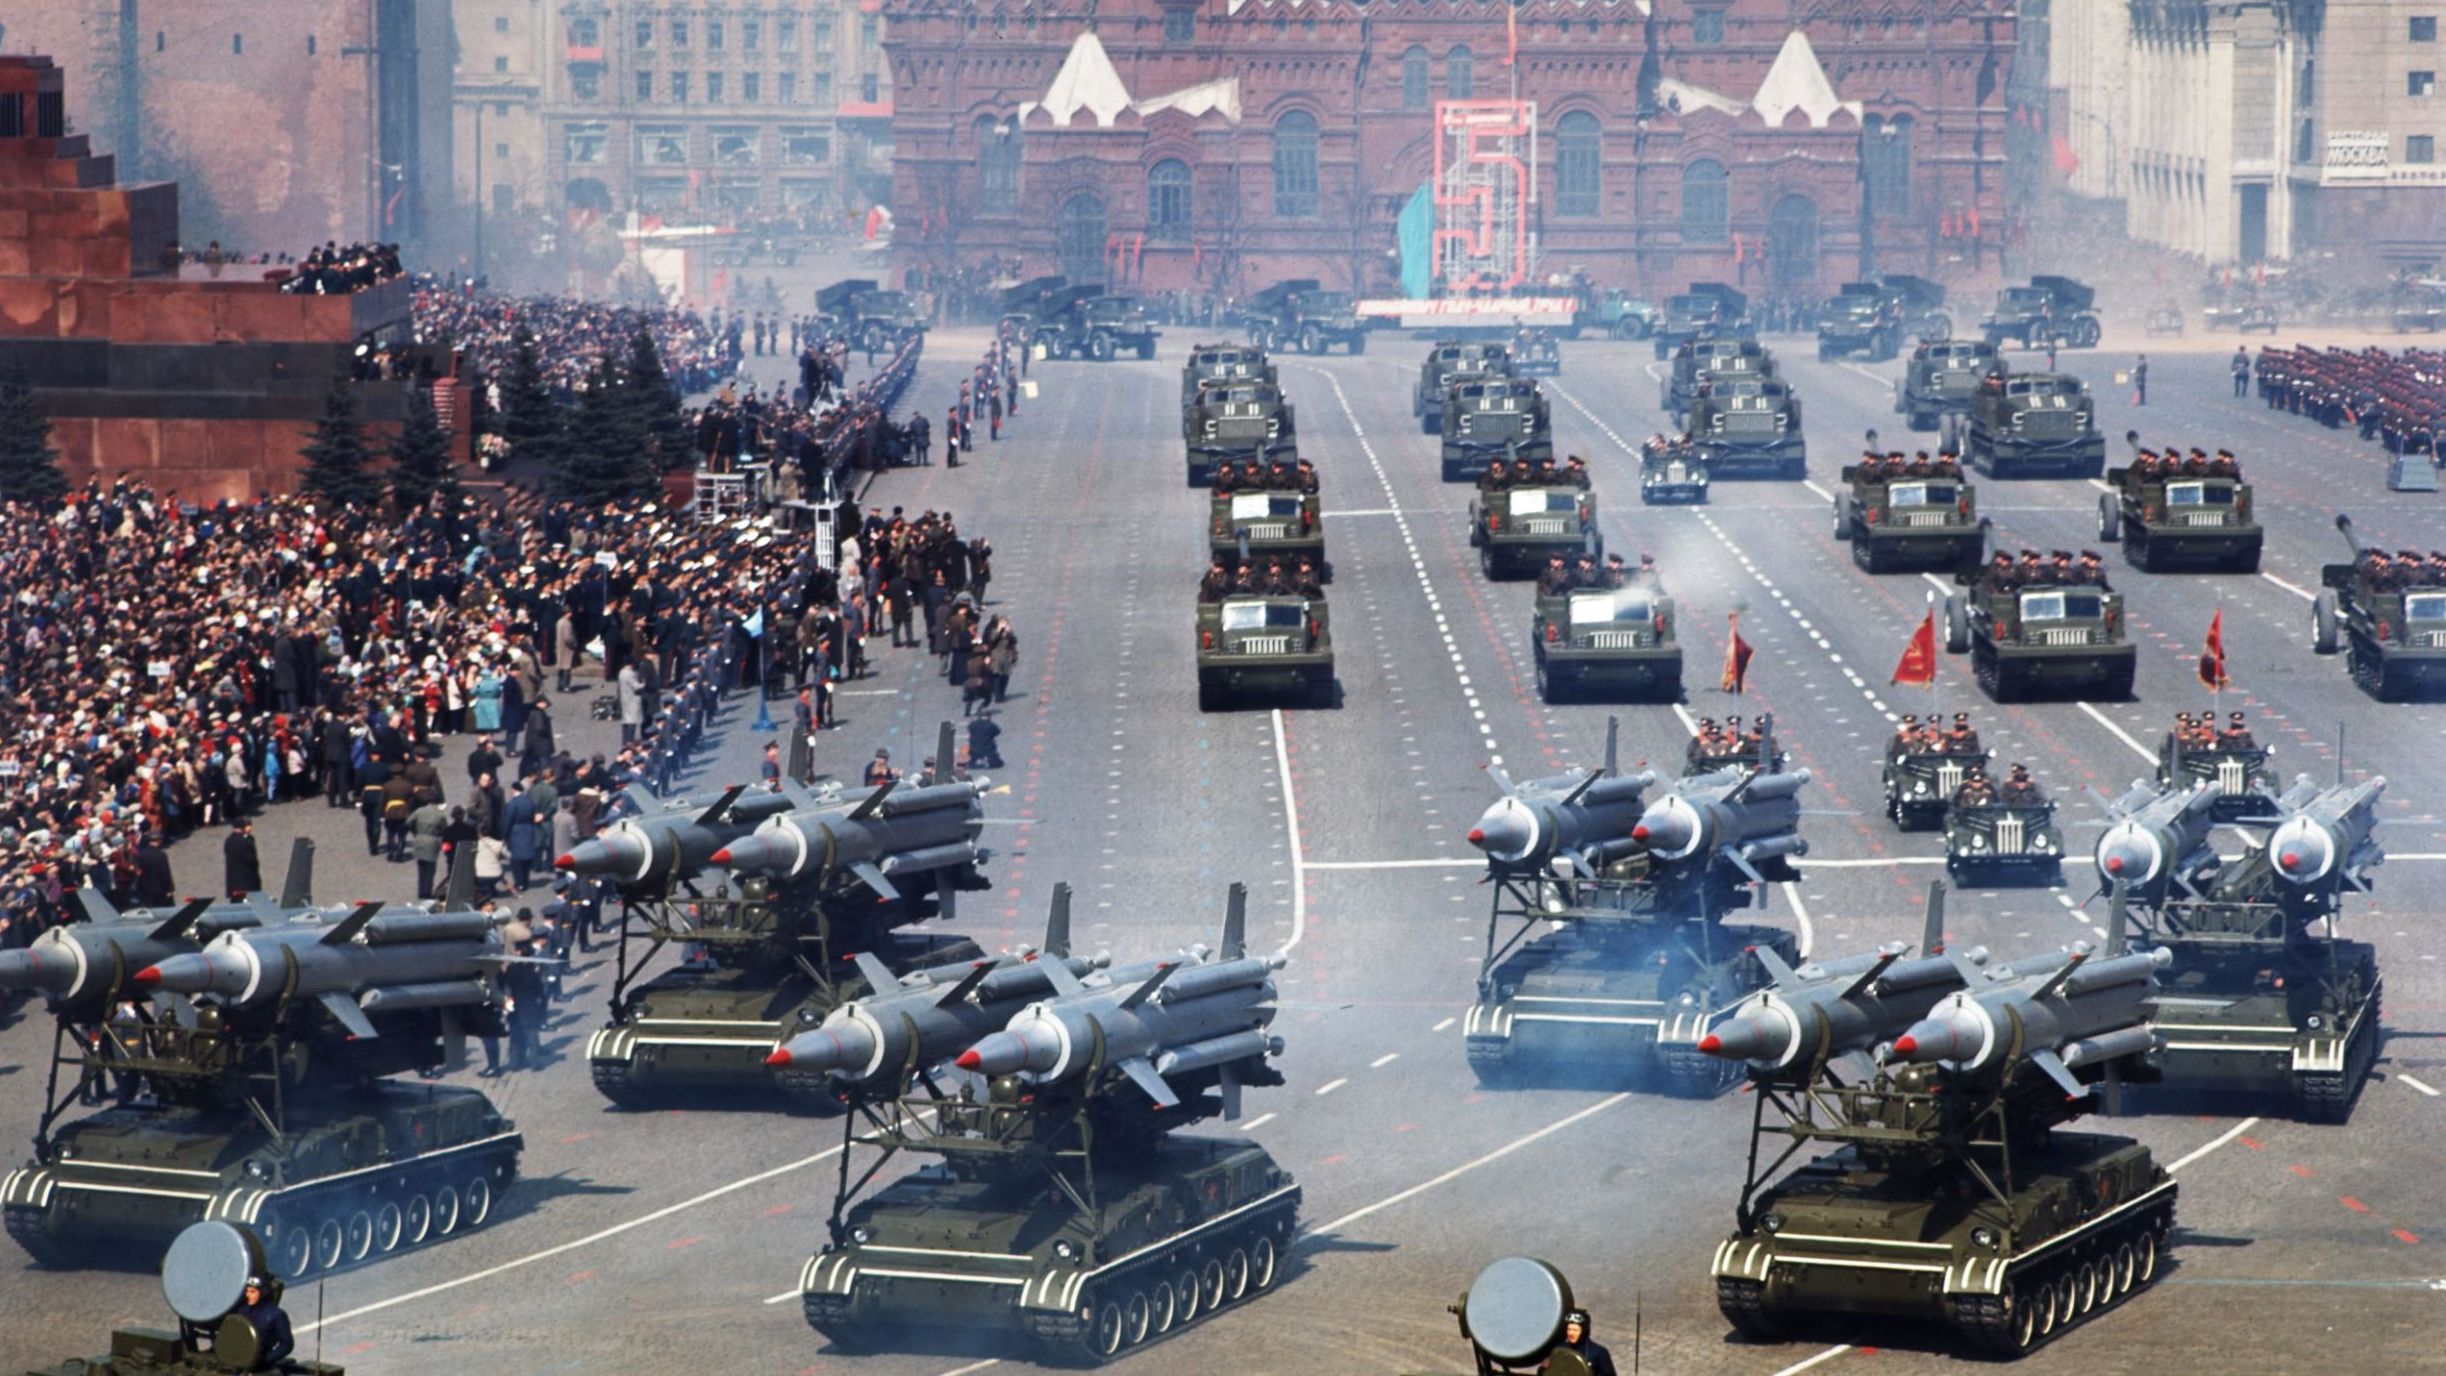 Missile launchers are on display during a military parade in Moscow's Red Square in 1967.